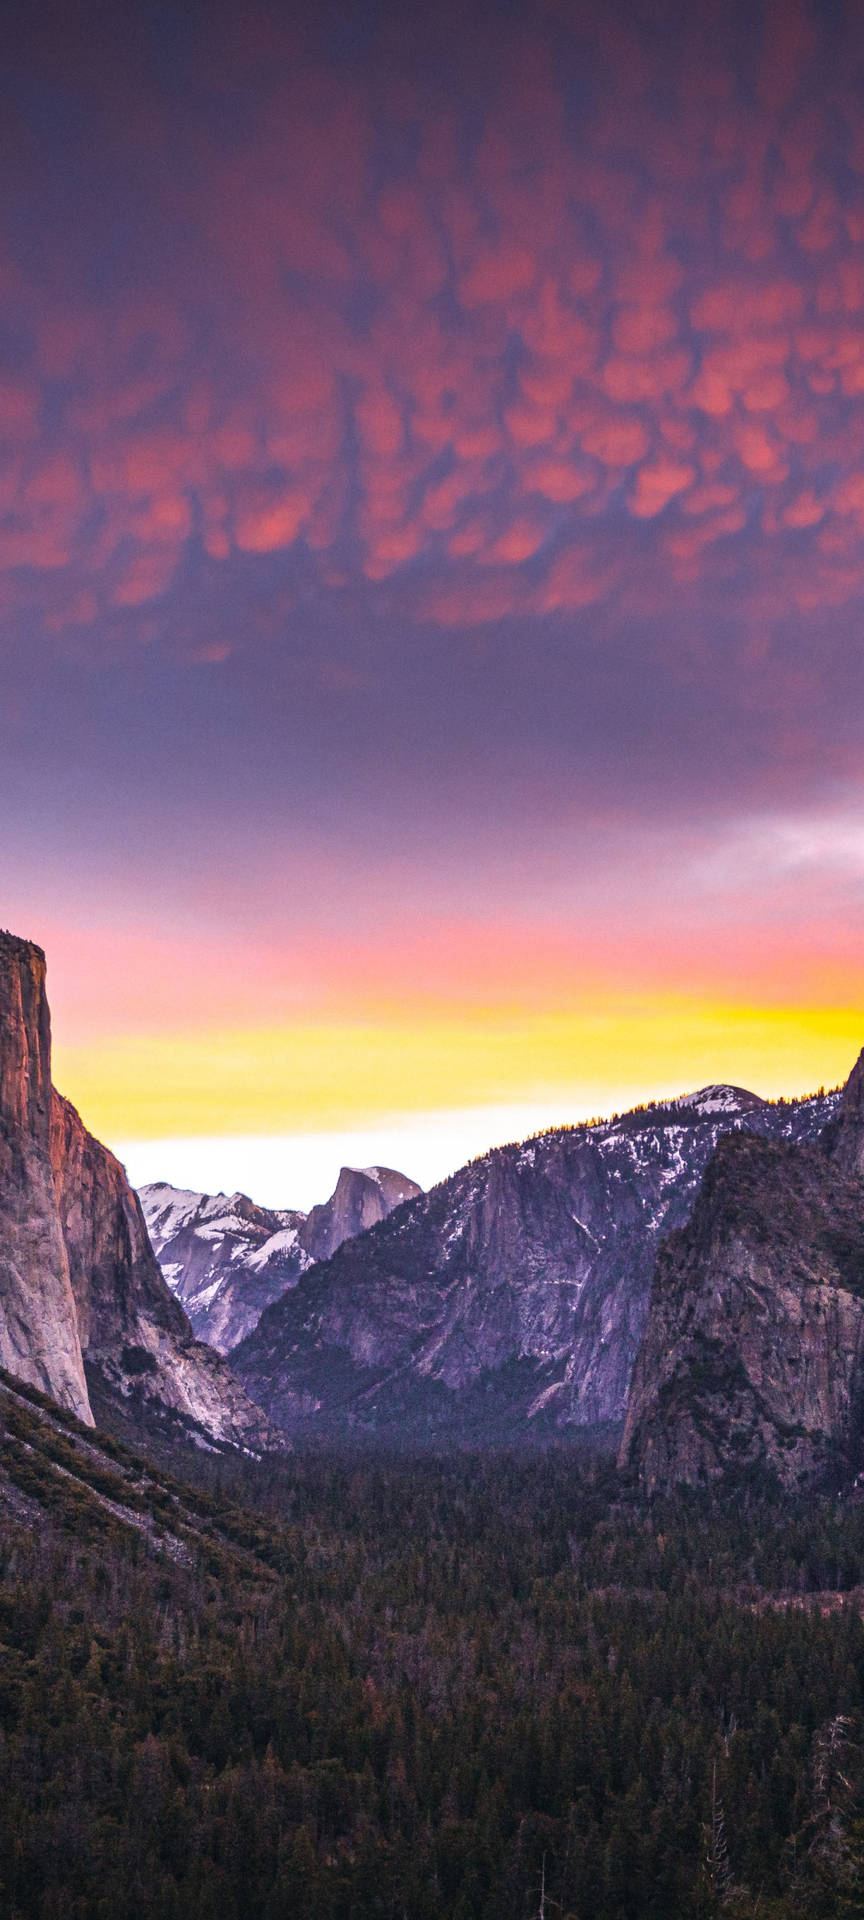 Download Enjoy the breathtaking views at Yosemite National Park on your iPhone Wallpaper